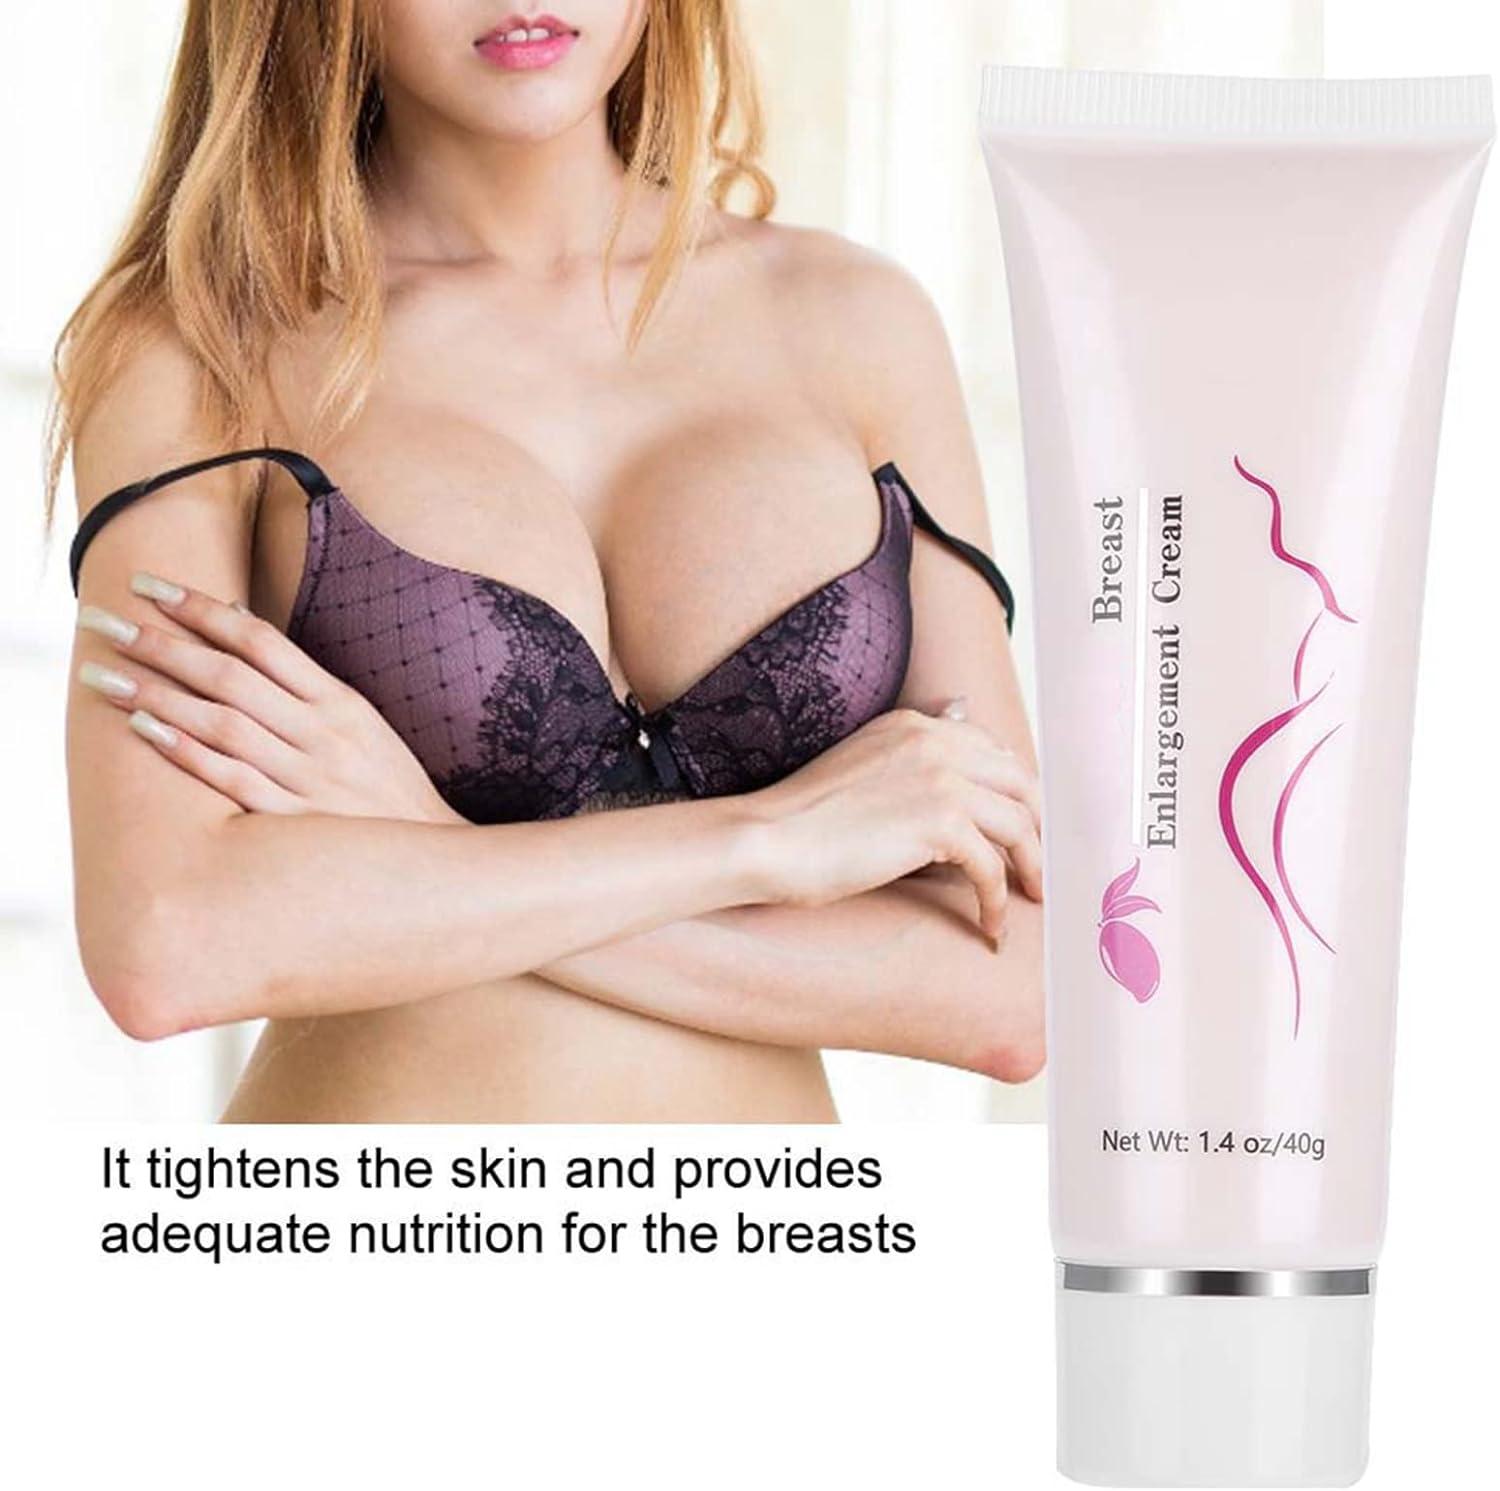 Breast Enhancement Cream 40g Chest Care Firming Lifting Breast